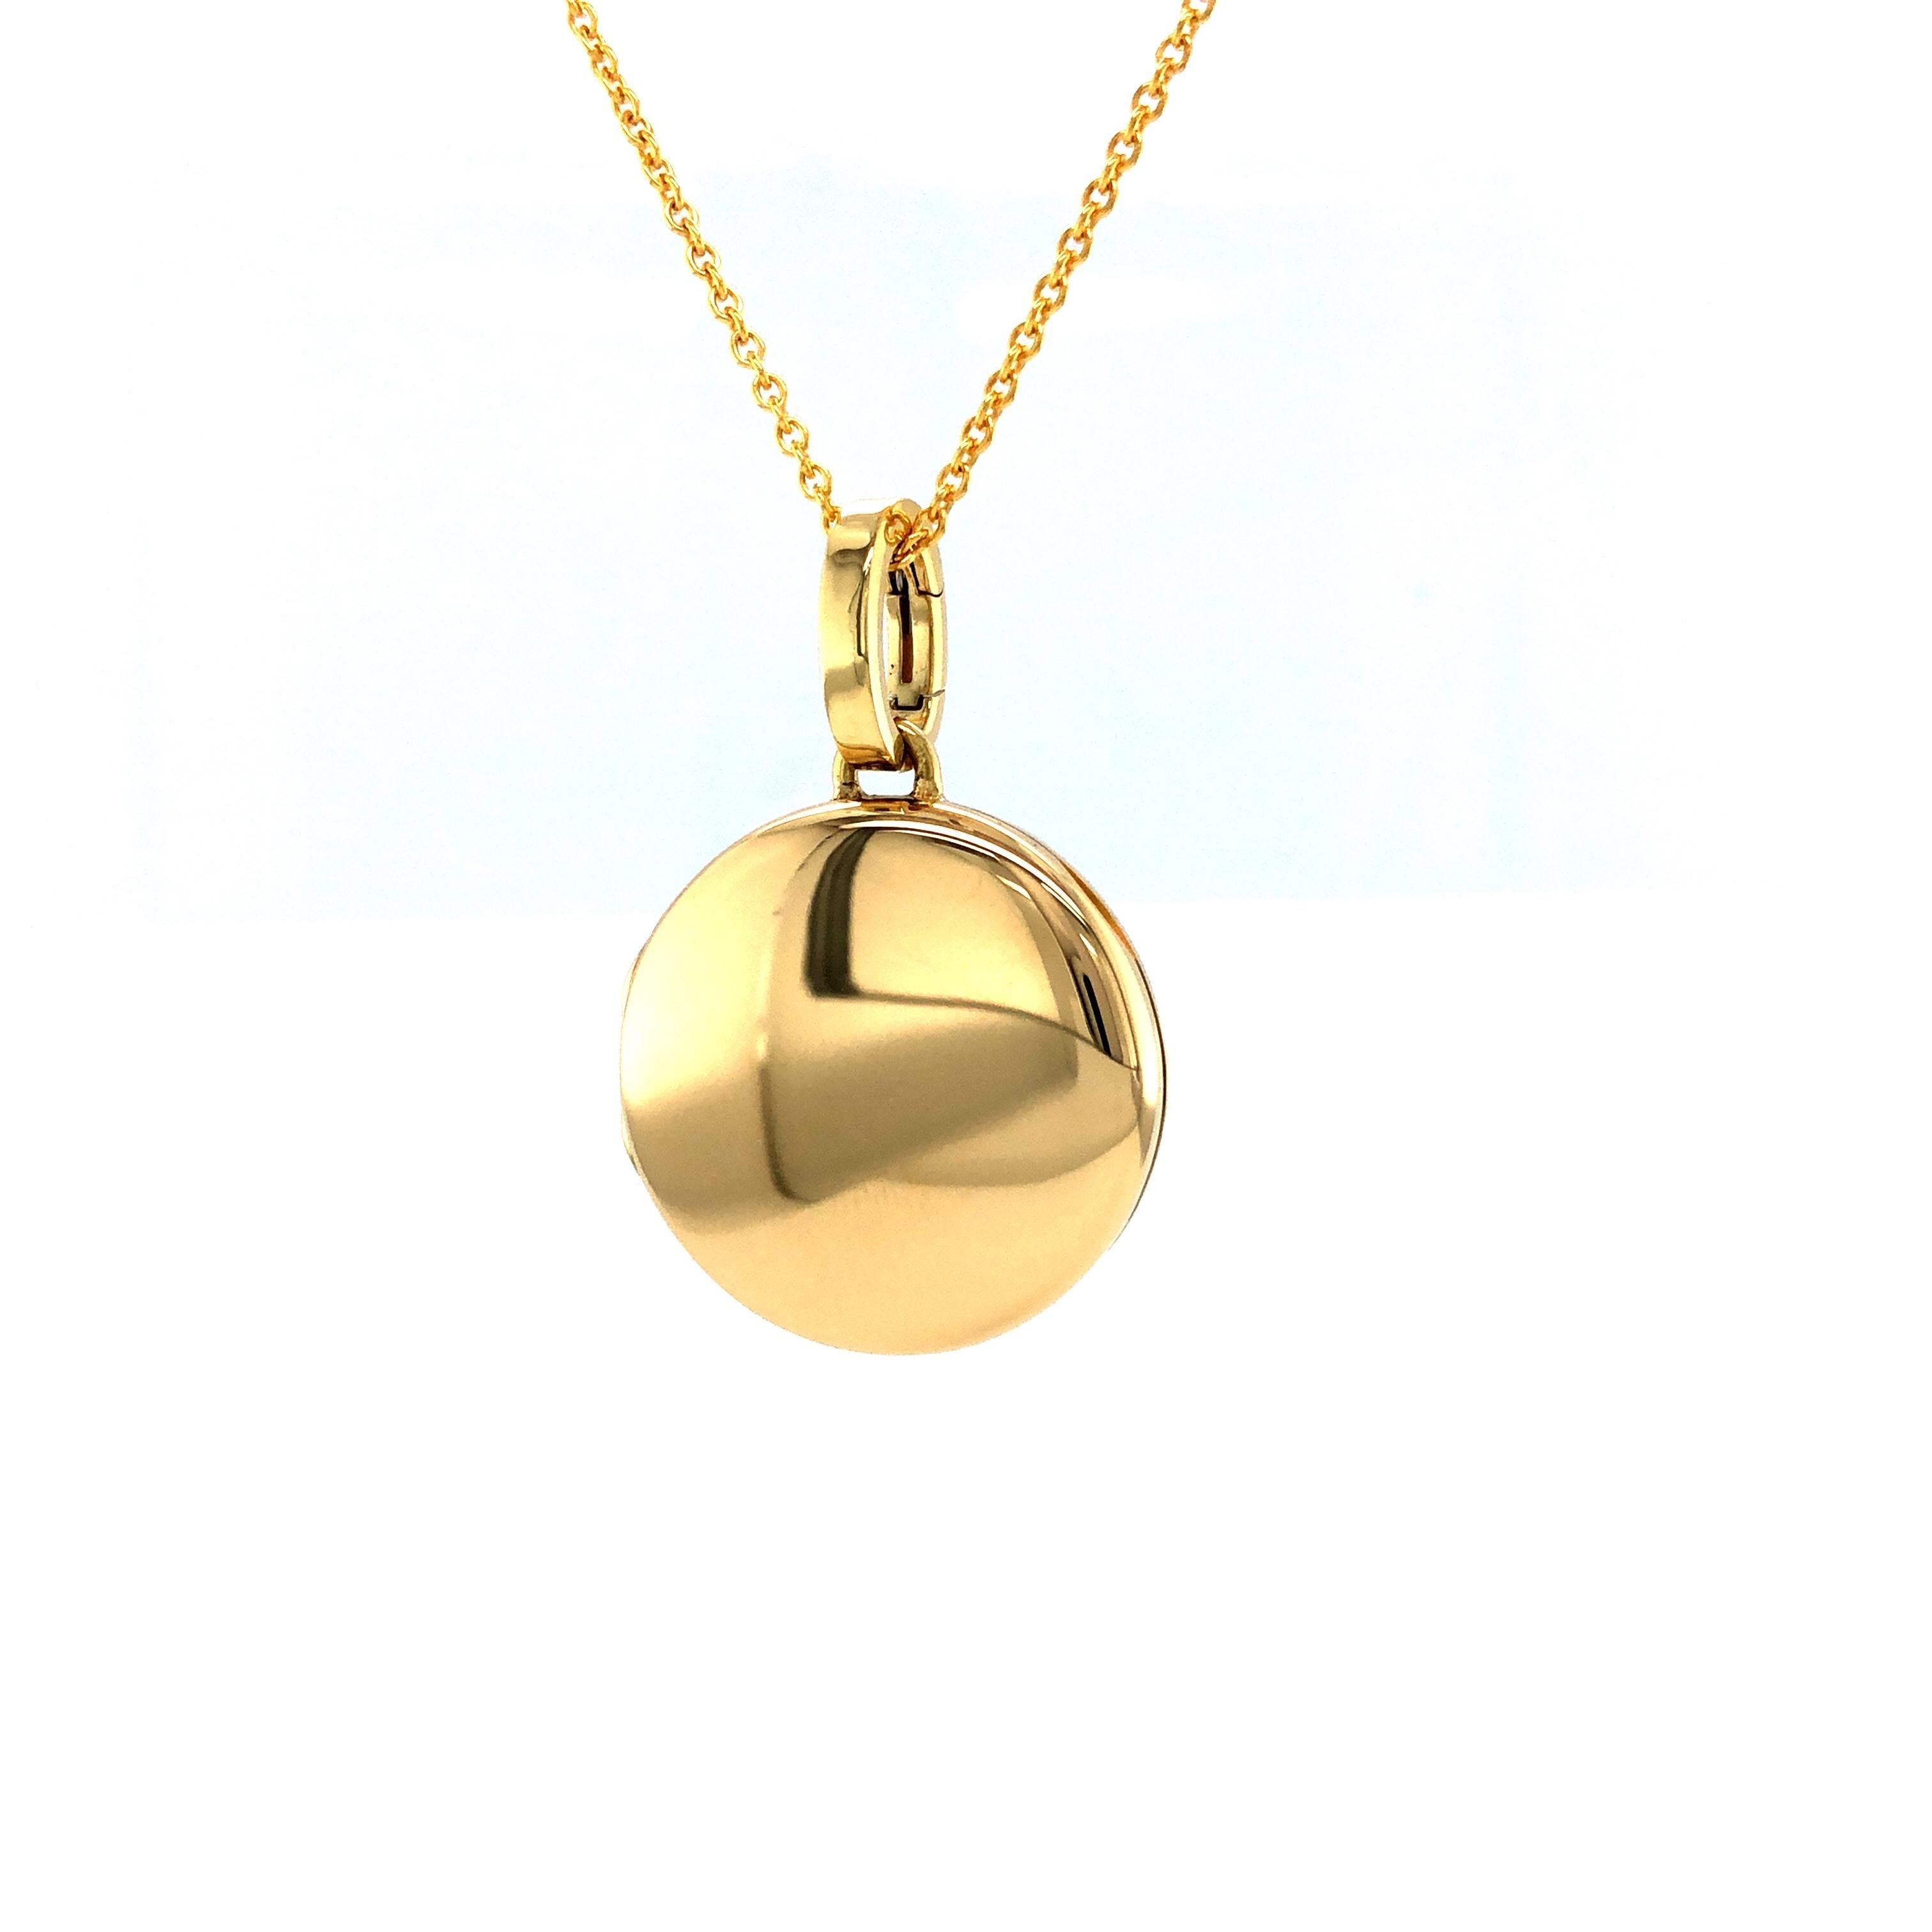 Victor Mayer customizable round polished pendant locket 18k rose gold, Hallmark Collection, Diameter app. 21 mm

About the creator Victor Mayer
Victor Mayer is internationally renowned for elegant timeless designs and unrivalled expertise in